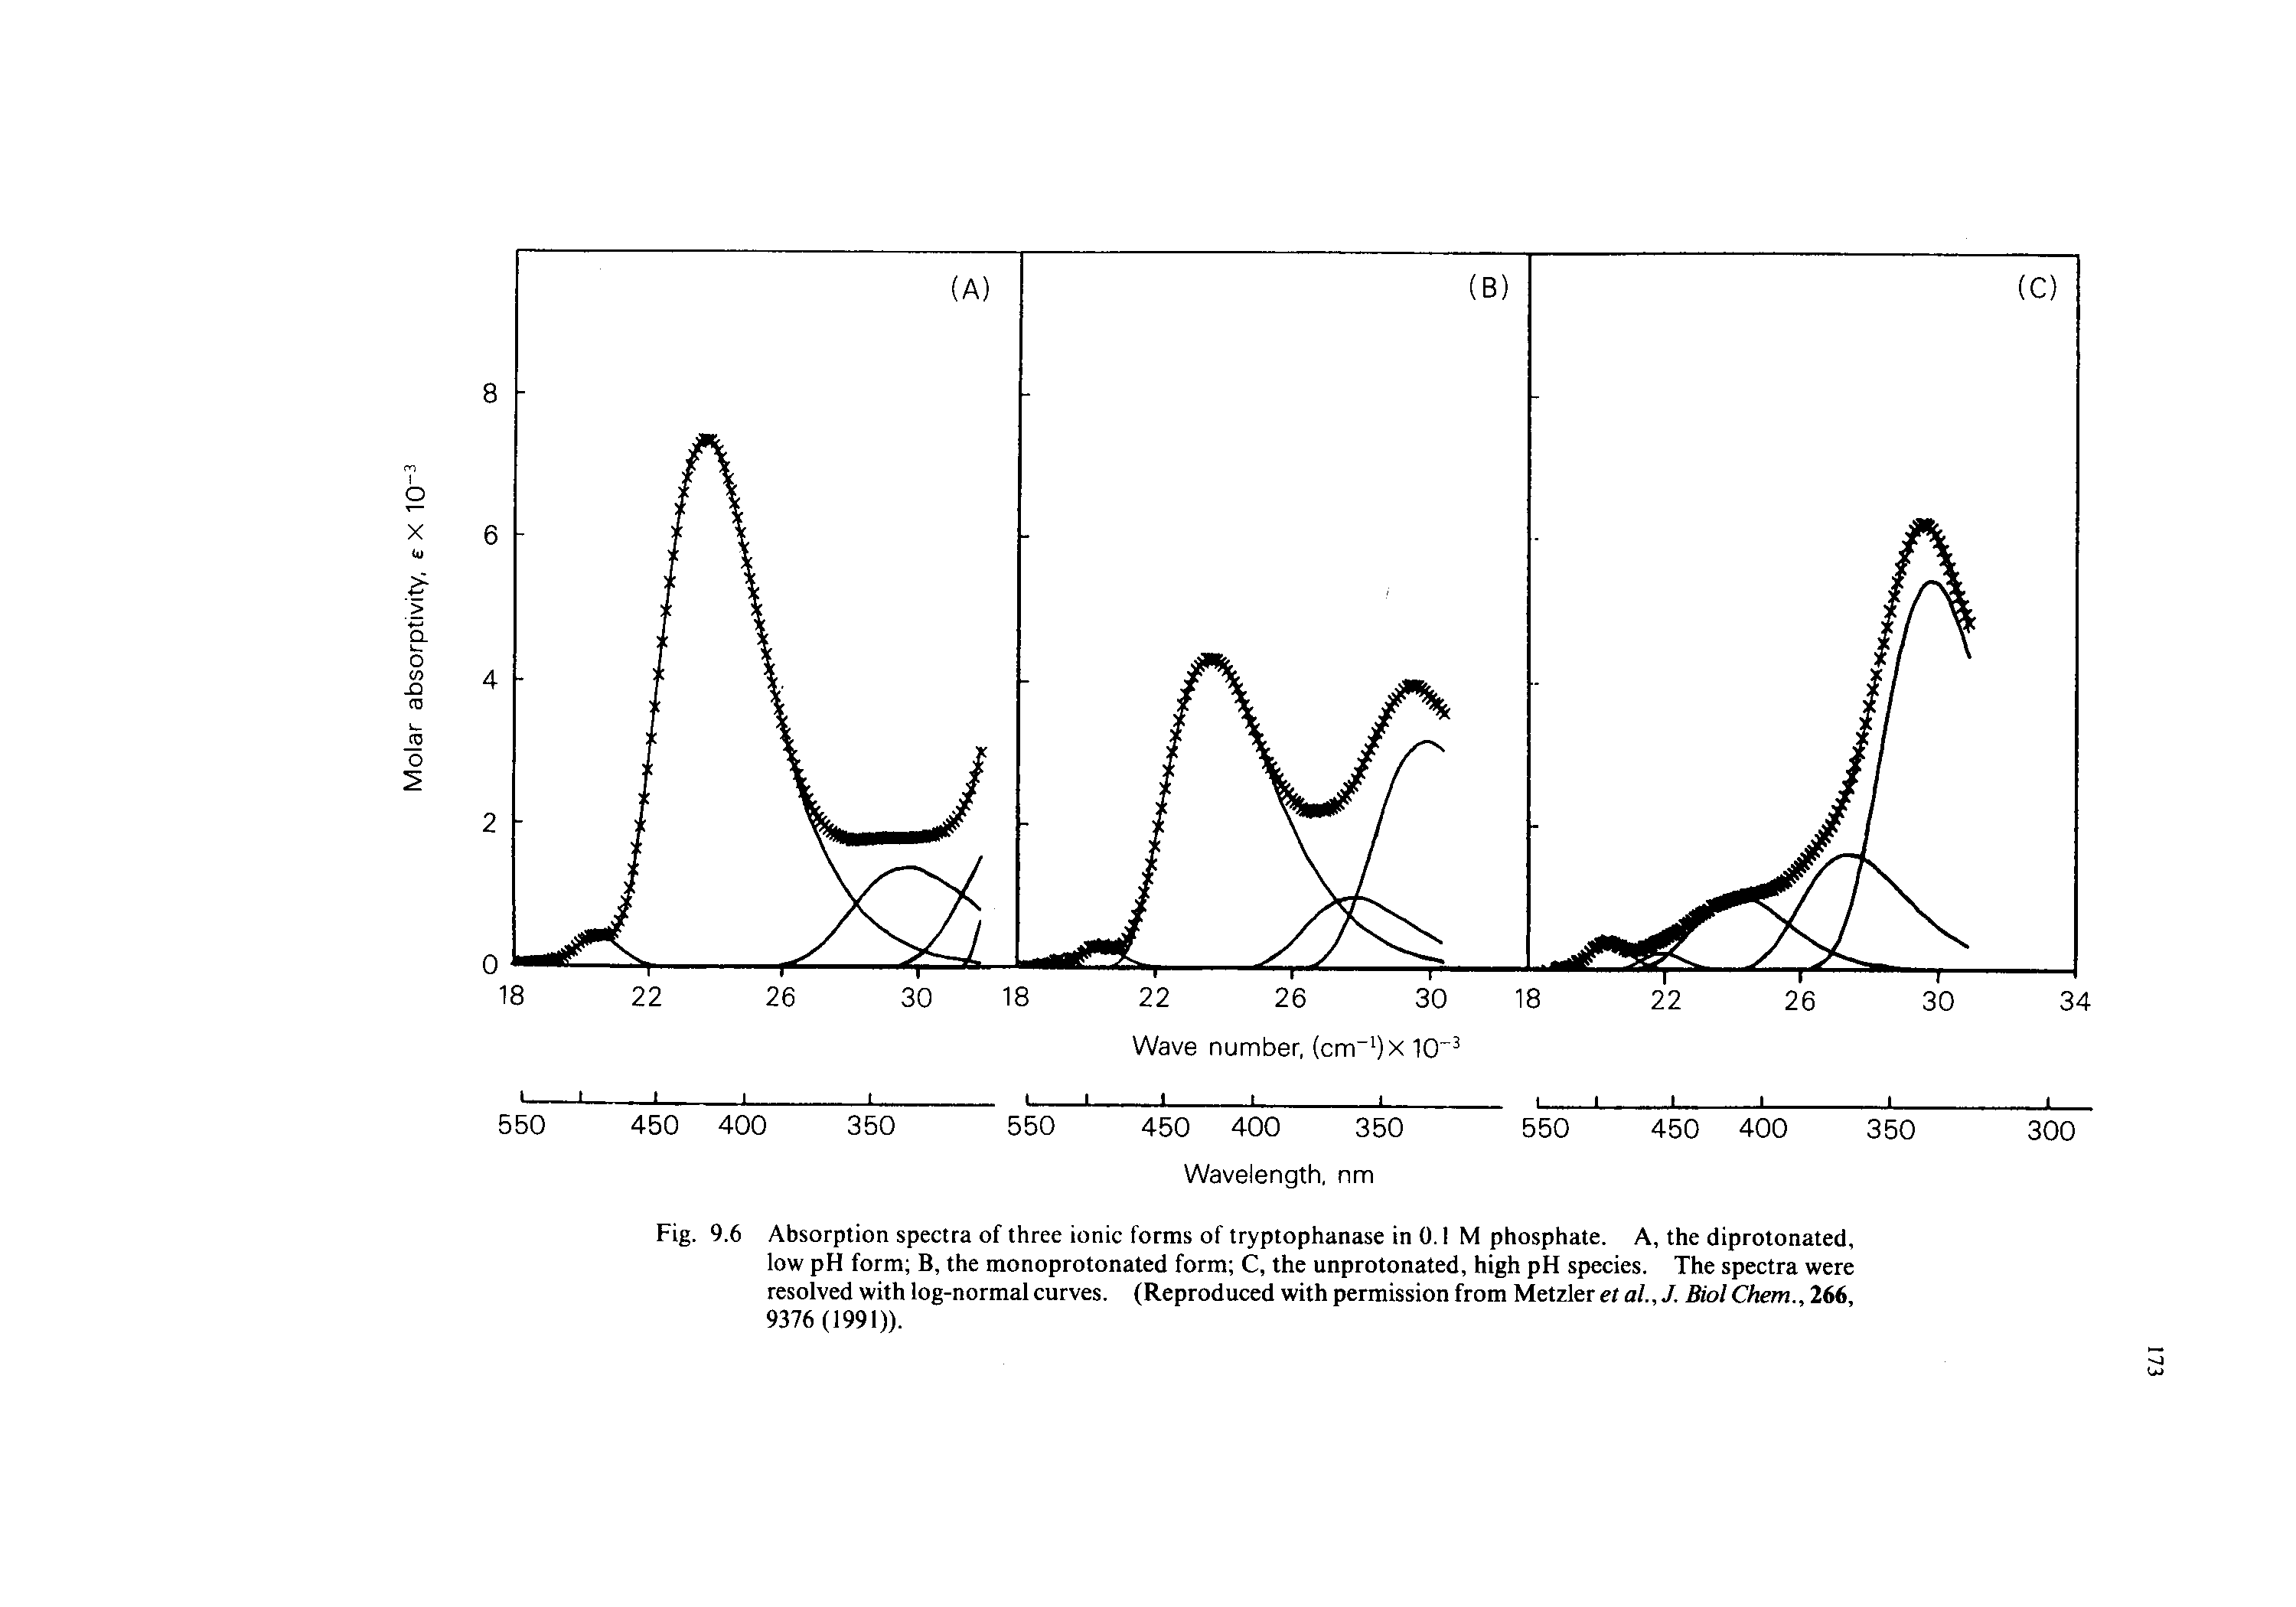 Fig. 9.6 Absorption spectra of three ionic forms of tryptophanase in 0.1 M phosphate. A, the diprotonated, low pH form B, the monoprotonated form C, the unprotonated, high pH species. The spectra were resolved with log-normal curves. (Reproduced with permission from Metzler et al.,J. Biol Chem., 266,...